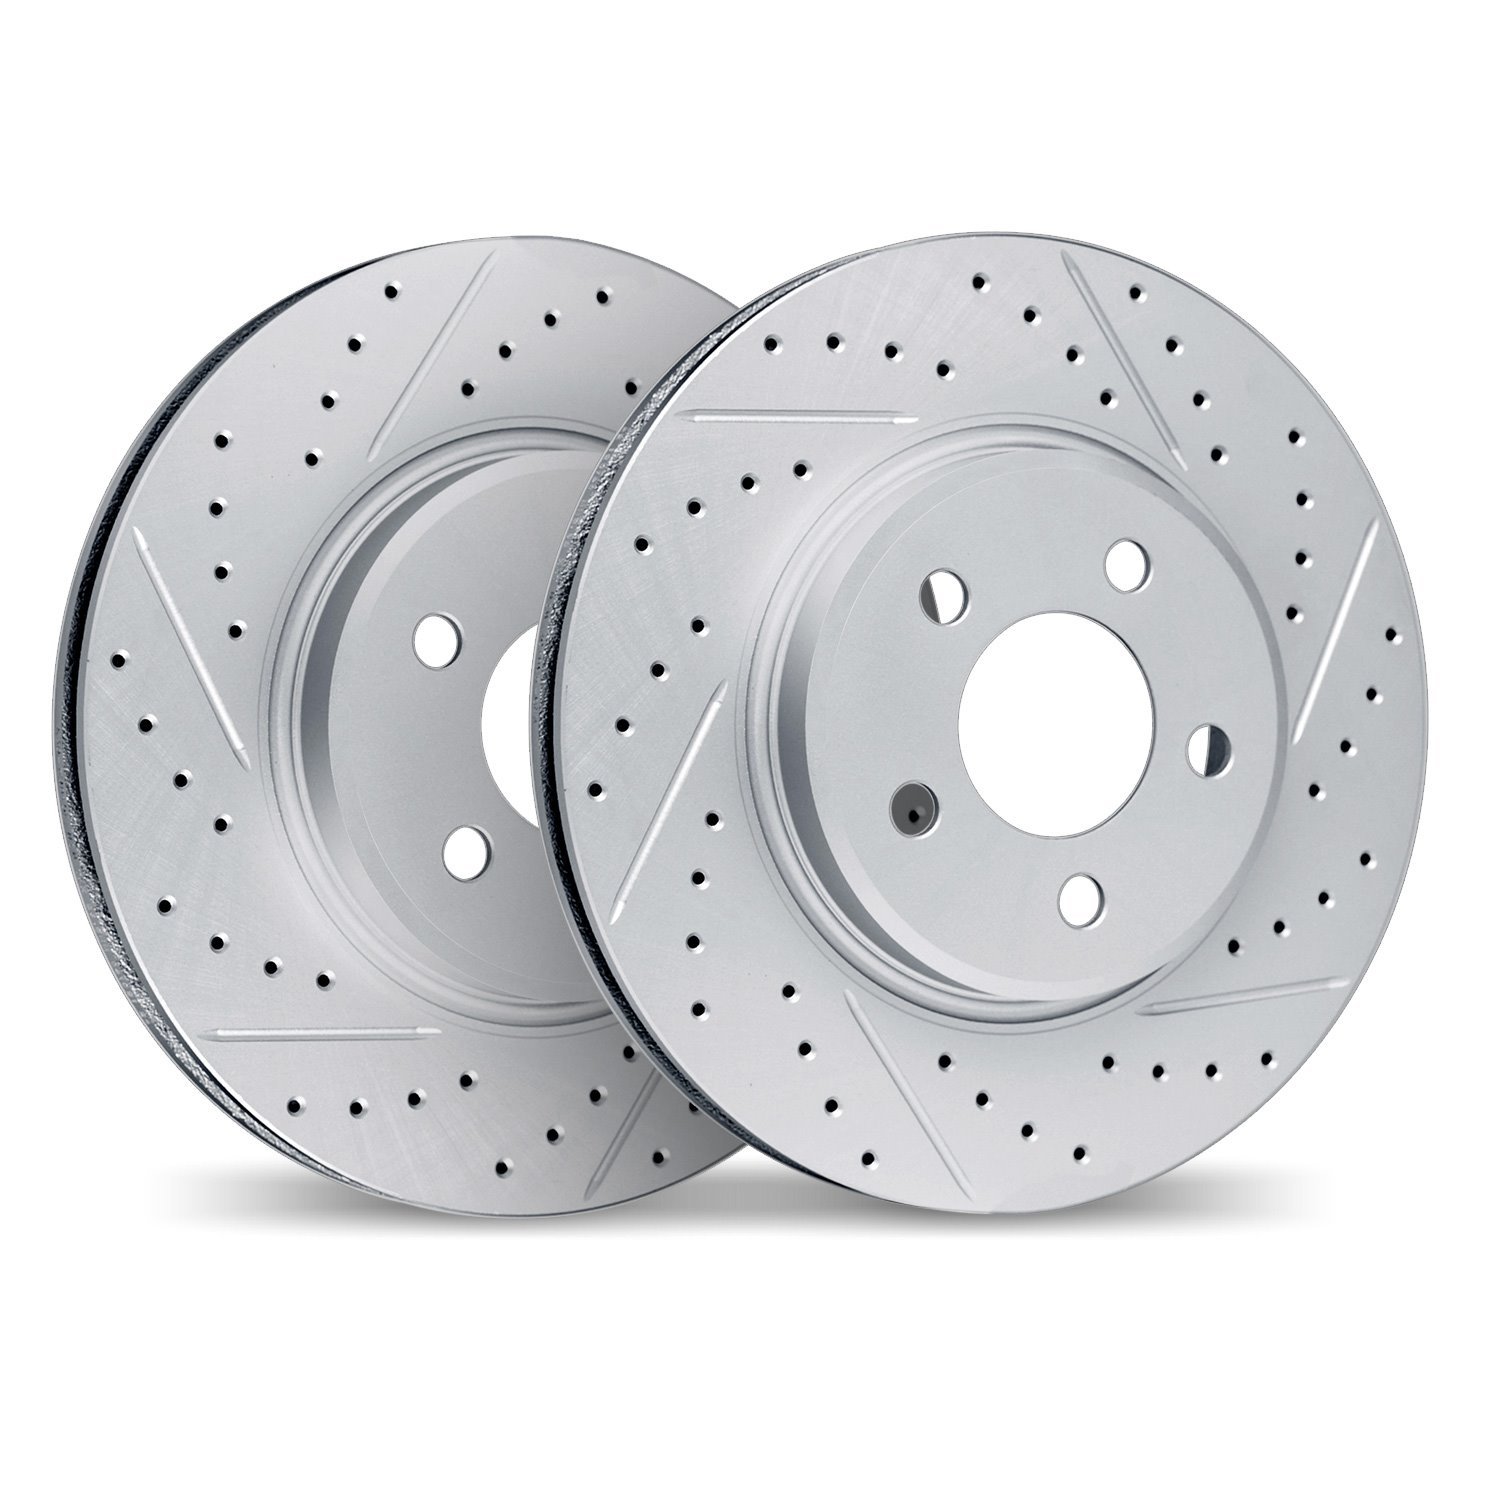 2002-67020 Geoperformance Drilled/Slotted Brake Rotors, 2007-2013 Infiniti/Nissan, Position: Front